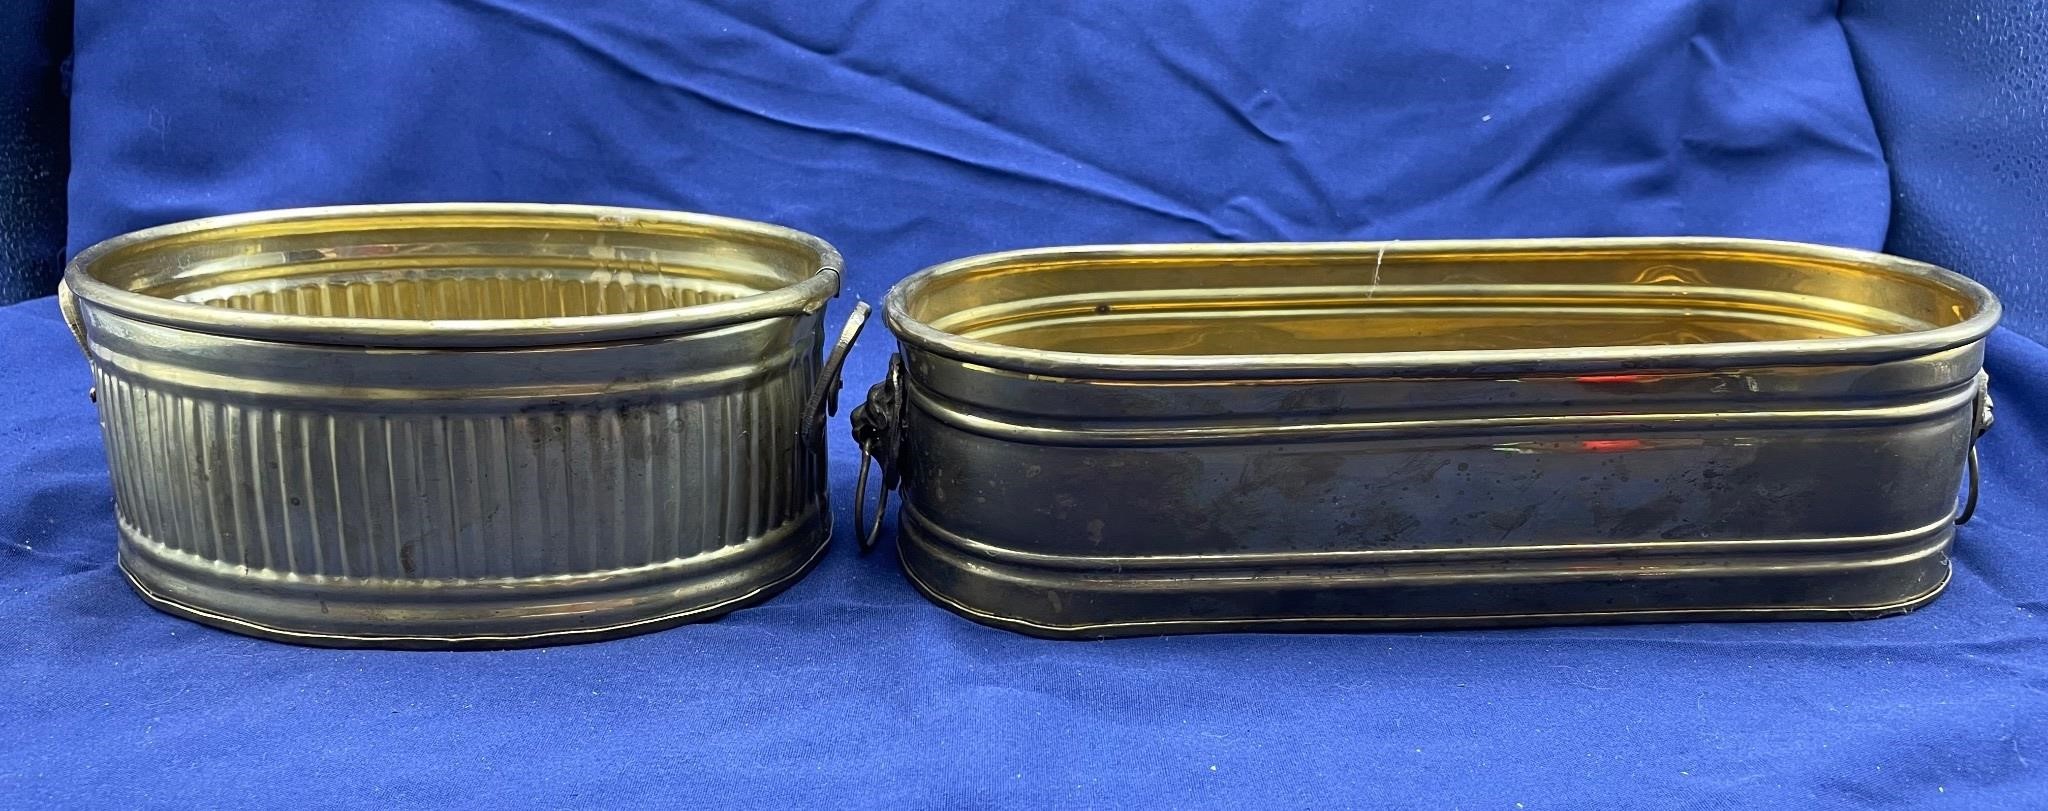 2 Small Oval Brass Planters